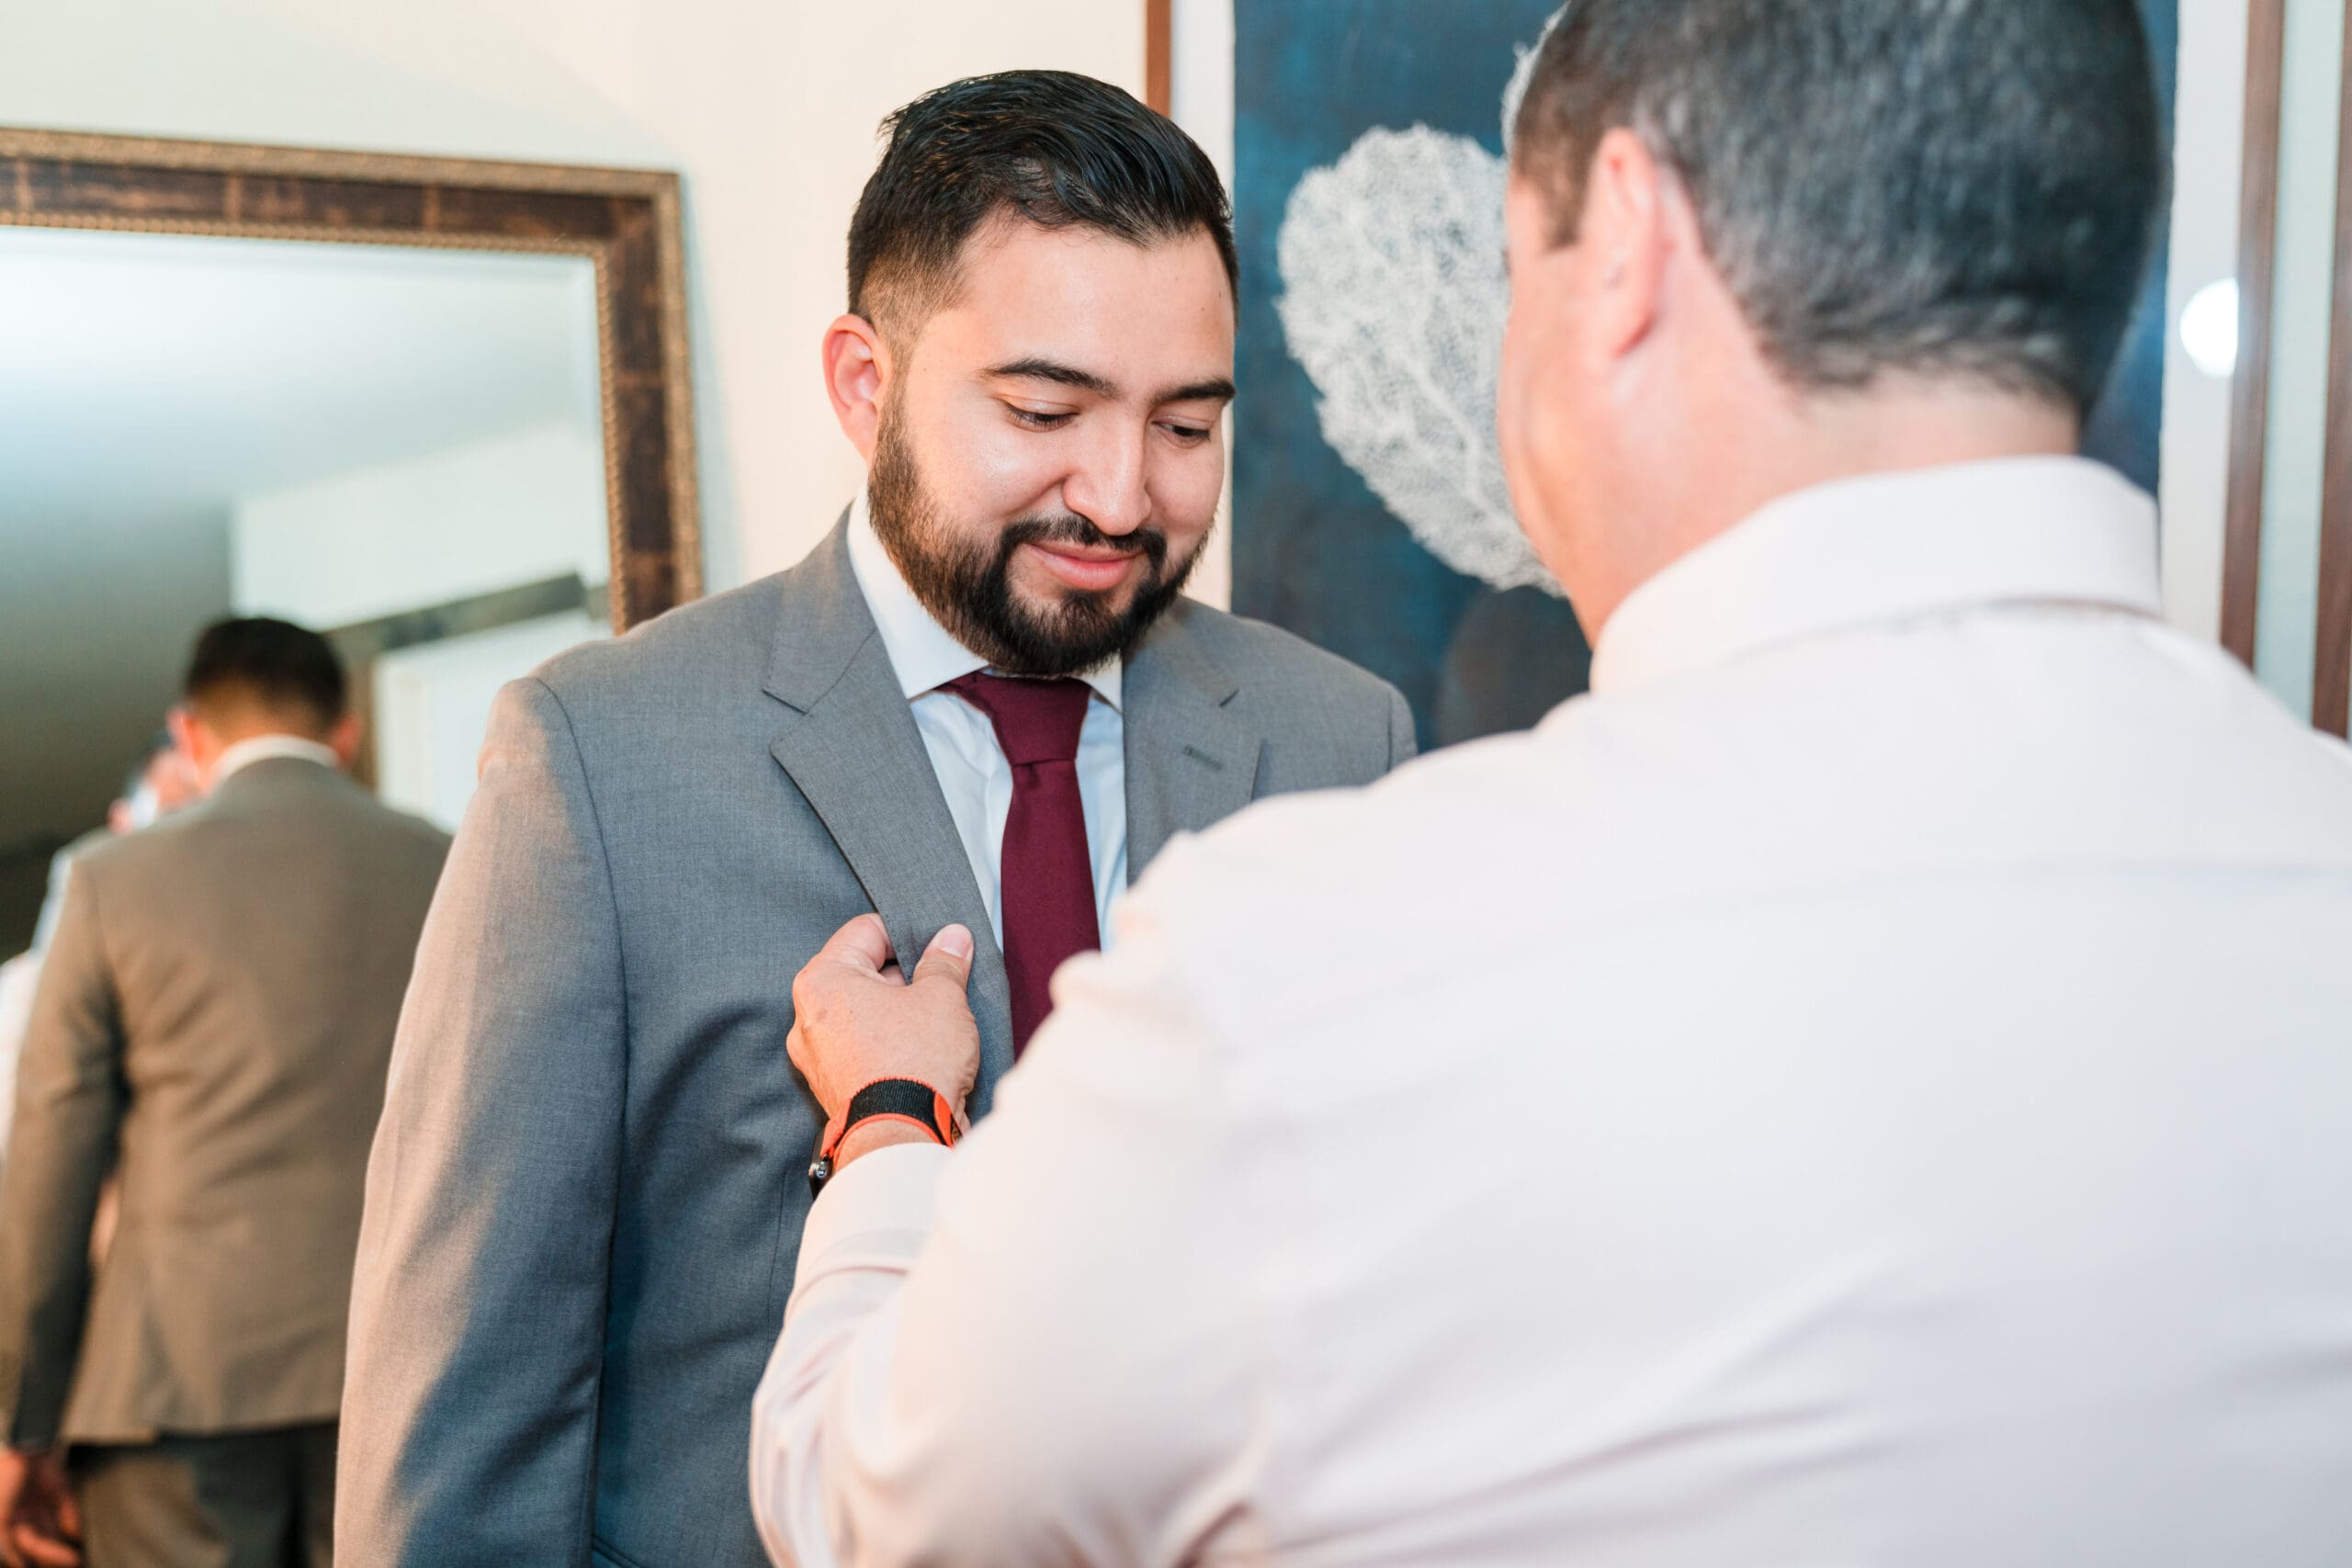 Jonah's best man fastening his sports coat in the bridal suite at Sterling Event Venue before the wedding.